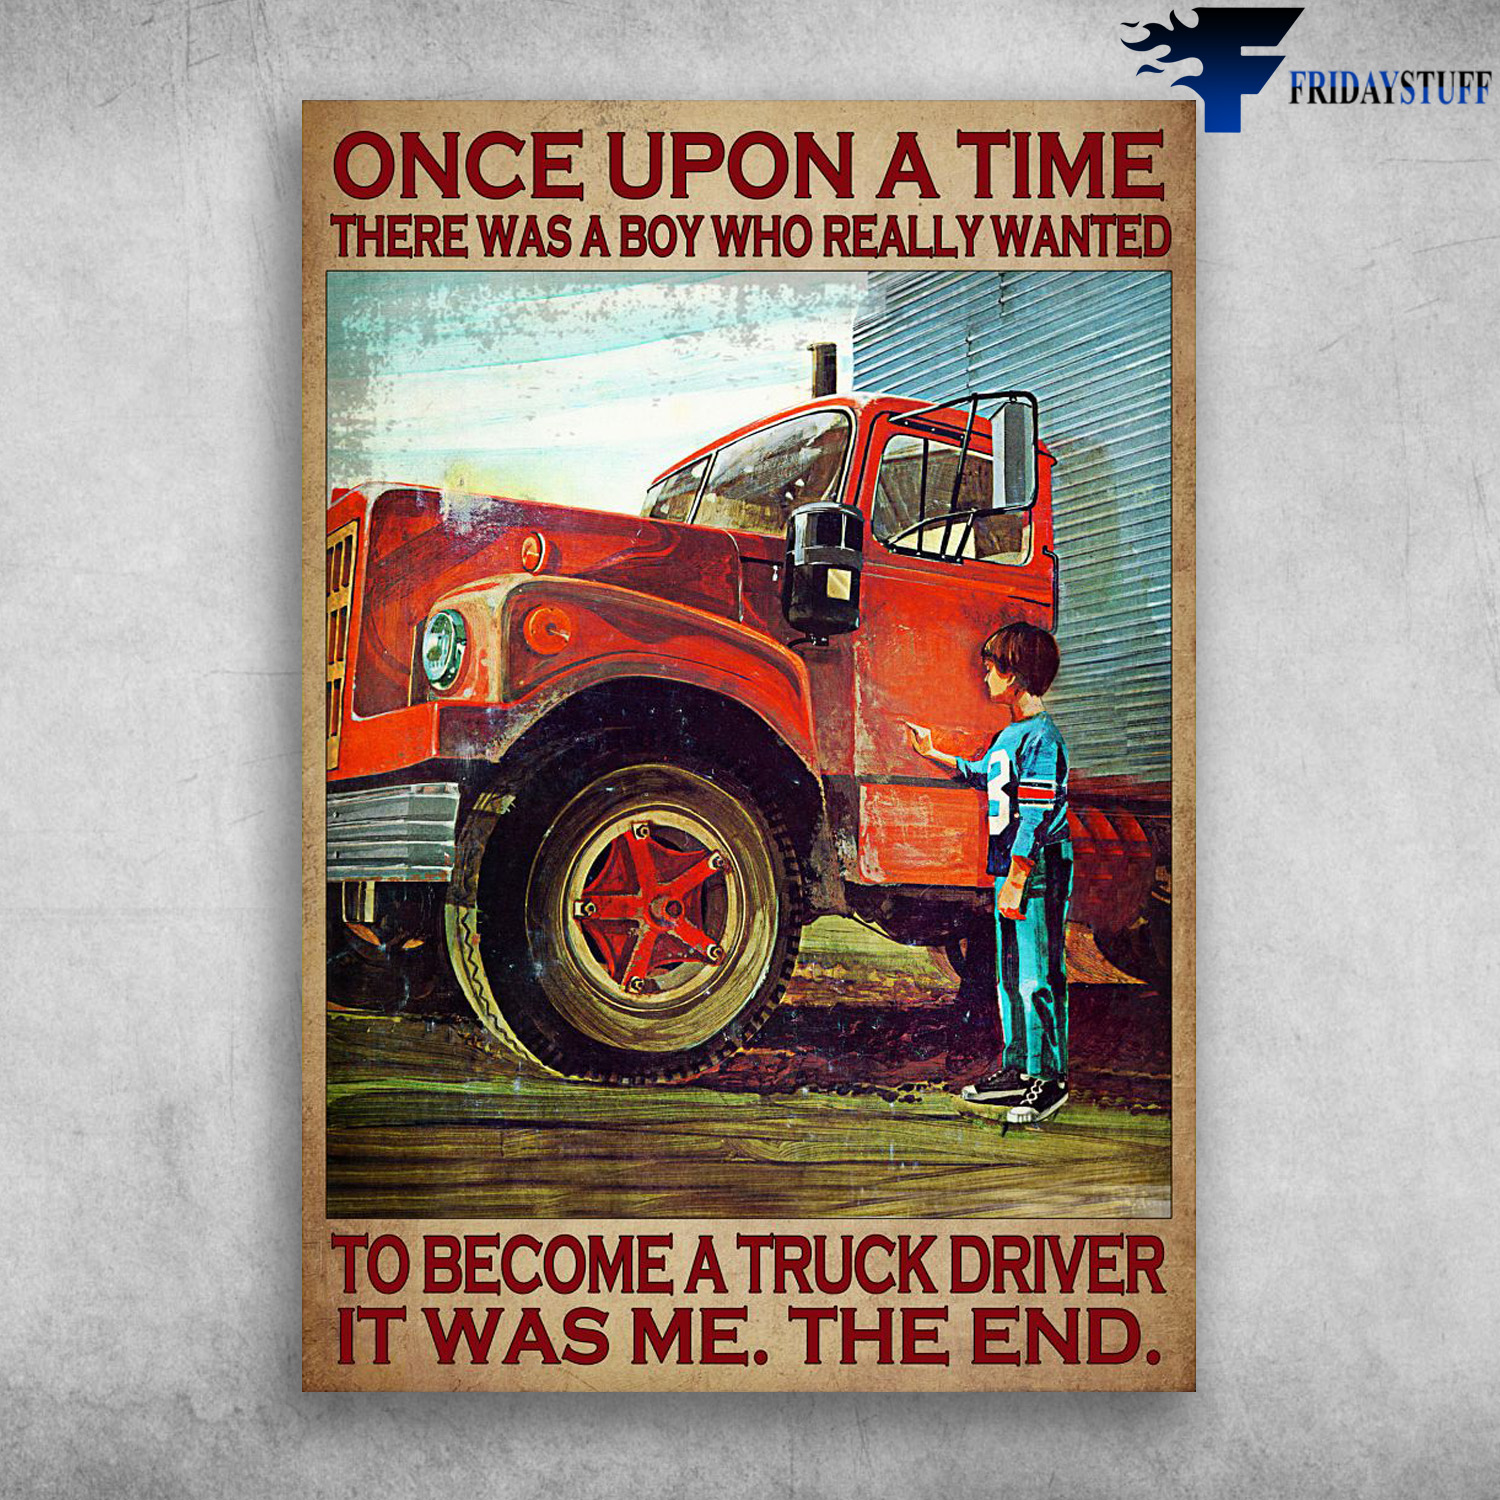 Truck Driver, Boy Trucker - Once Upon A Time, There Was A Boy, Who Really Wanted, To Become A Truck Driver, It Was Me, The End